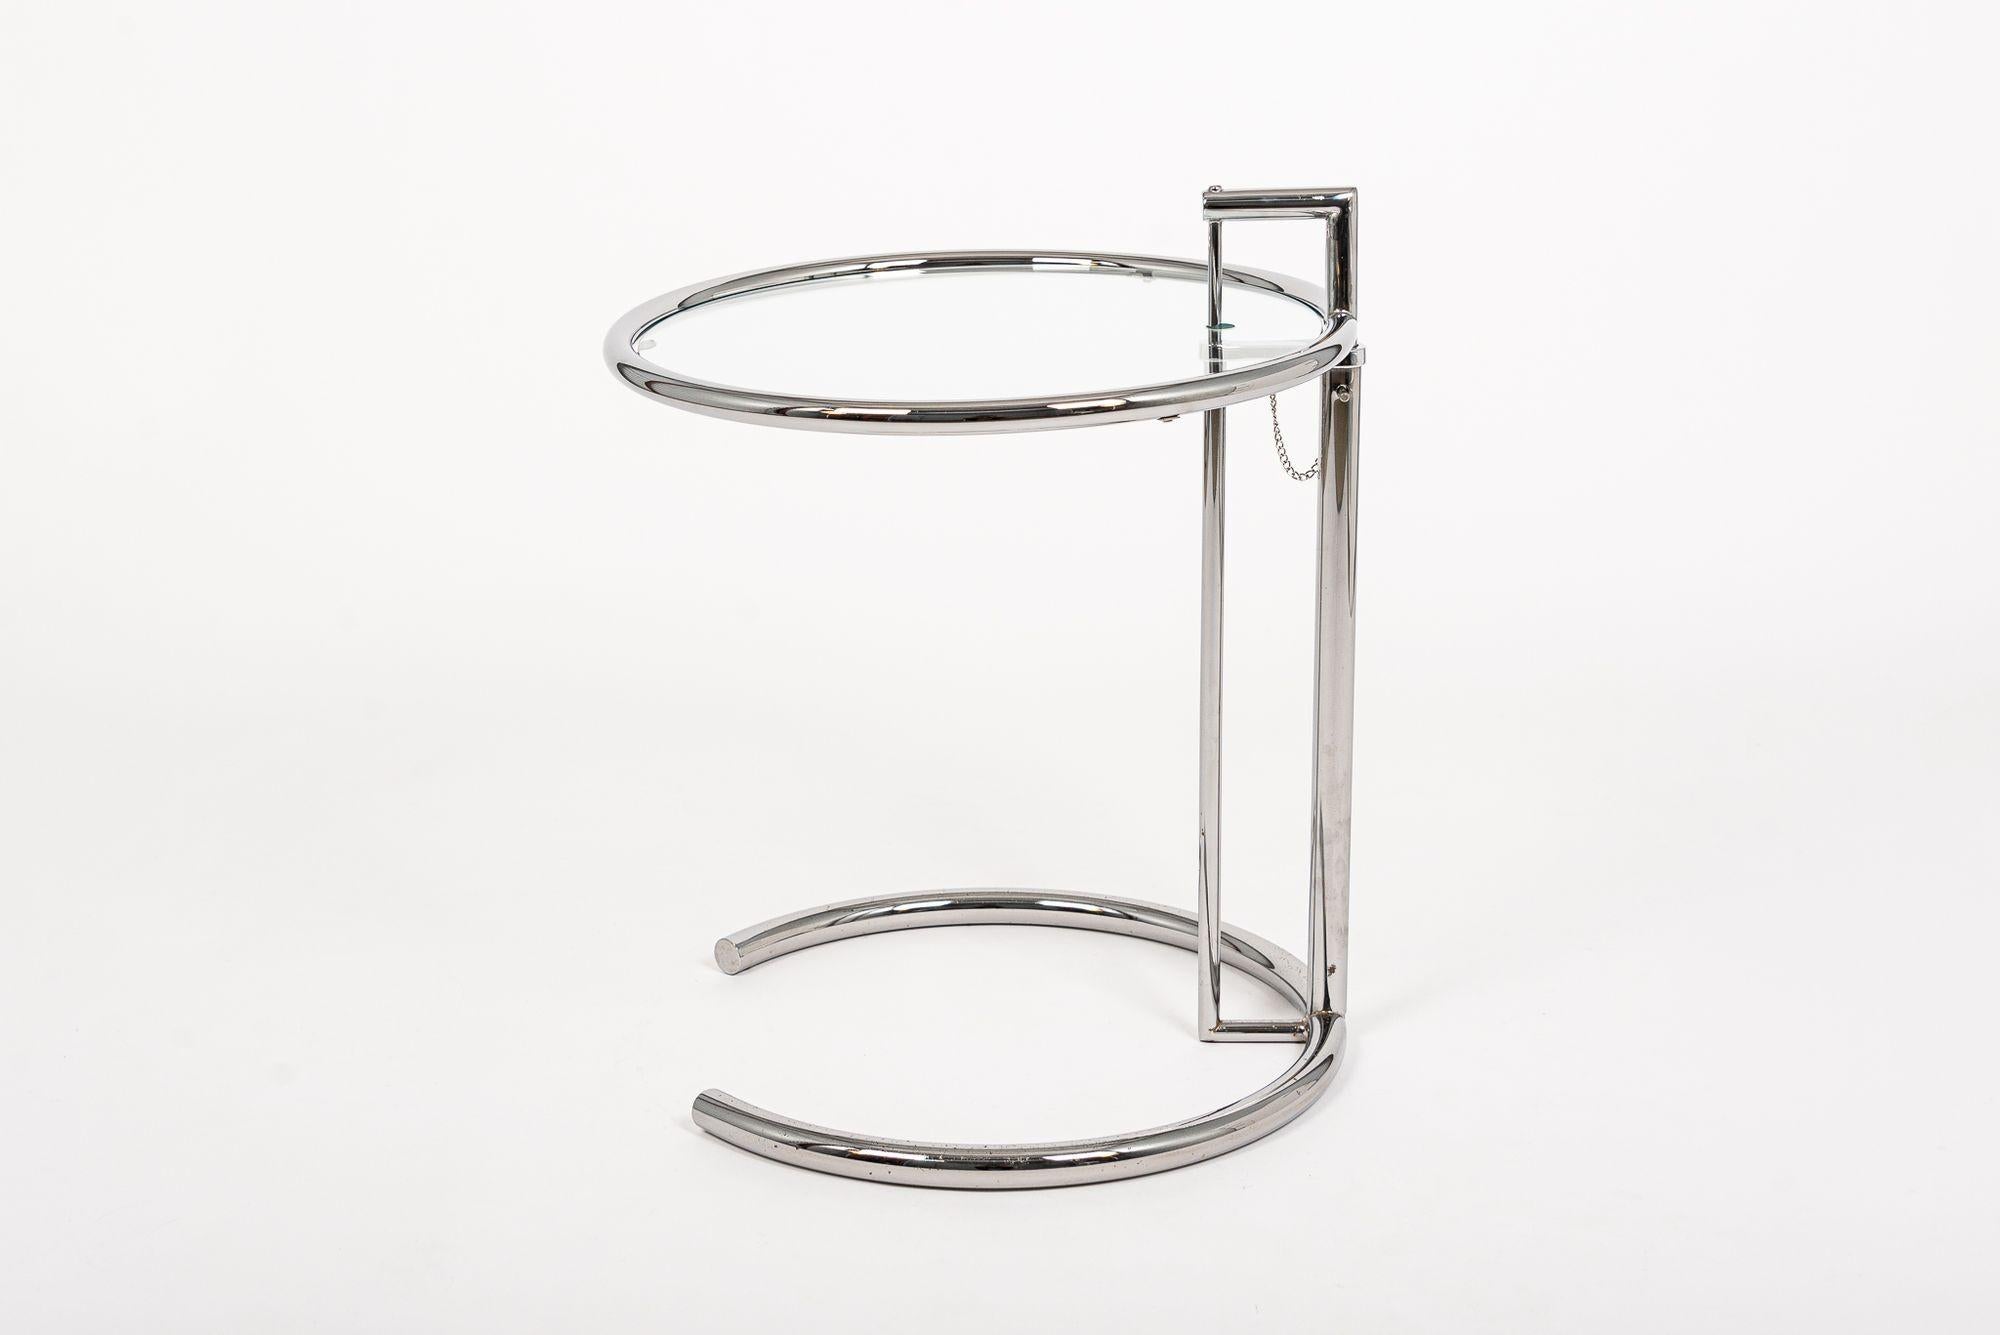 This tubular steel and glass Eileen Gray (attributed) E1027 end table was originally designed by Gray in 1926. The ingenious design features a chrome-plated tubular steel frame with circular glass tabletop that cantilevers over a c-shaped base. The